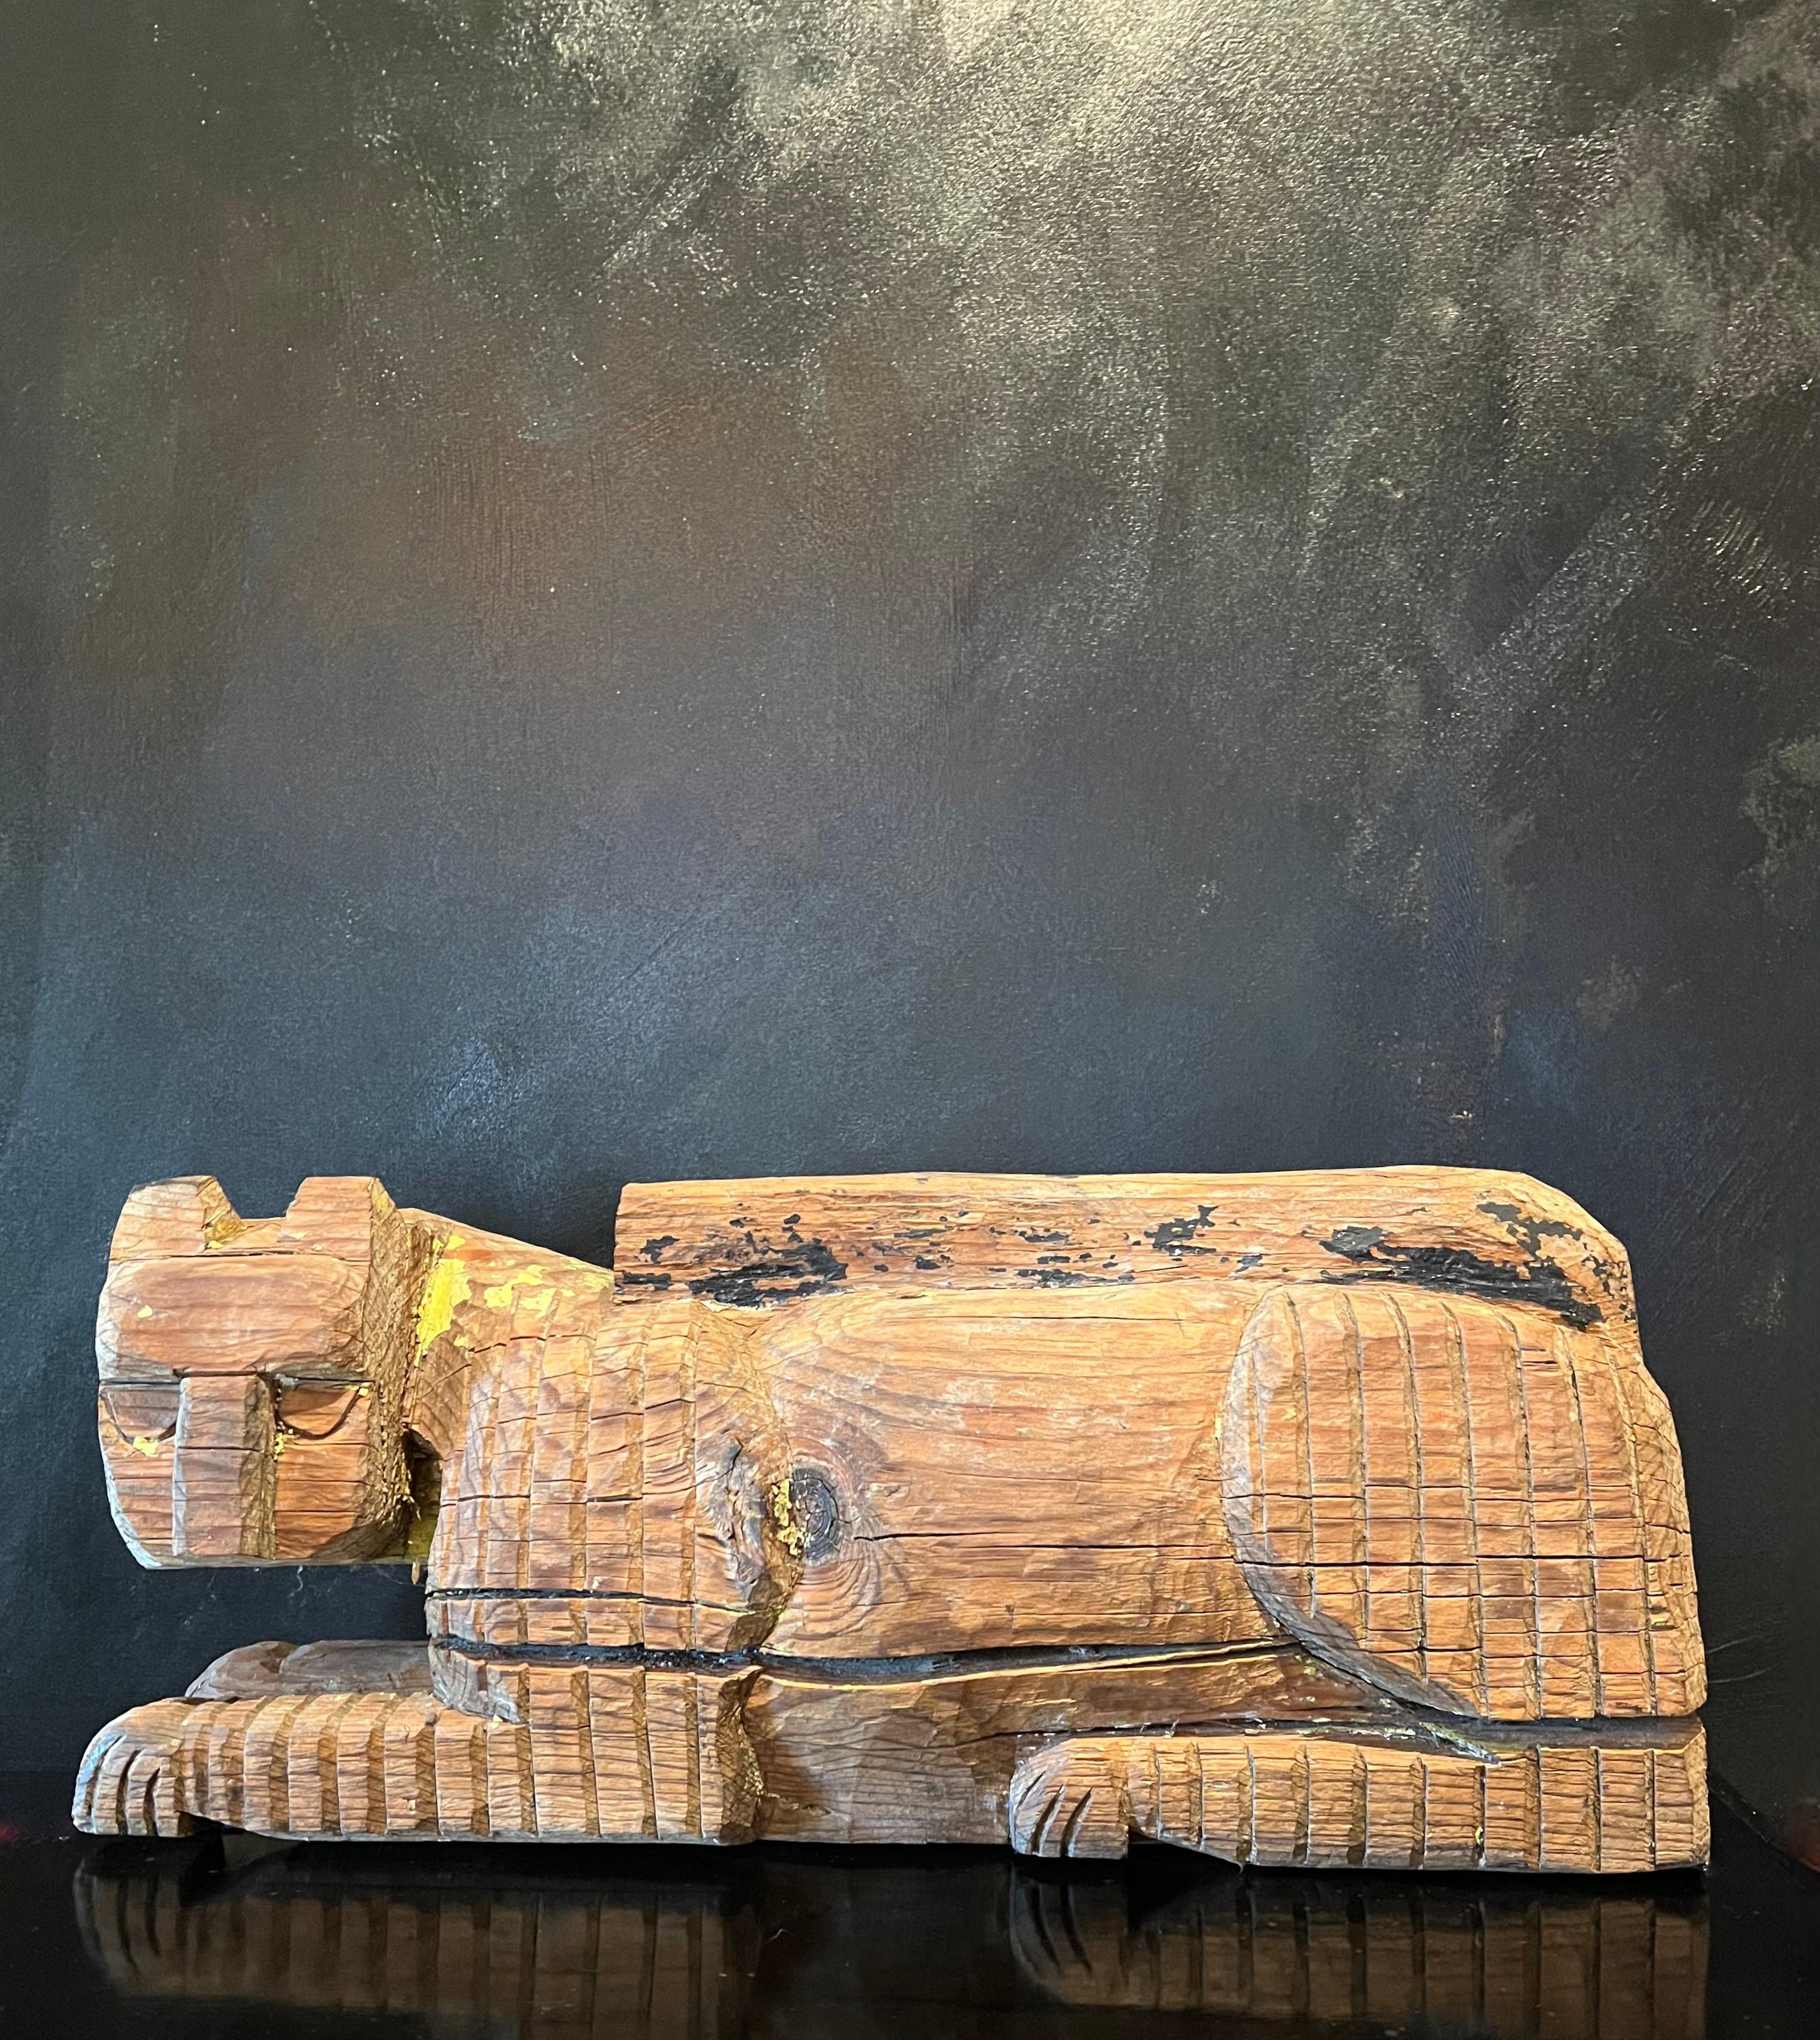 A wooden carved cat or Panther. This previously painted piece, or piece of wood, has the remnants of a yellow paint, and the markings of a cat.

A compliment to any shelf or table - a nice focal point. In the Folk Art Style, the piece is alluring